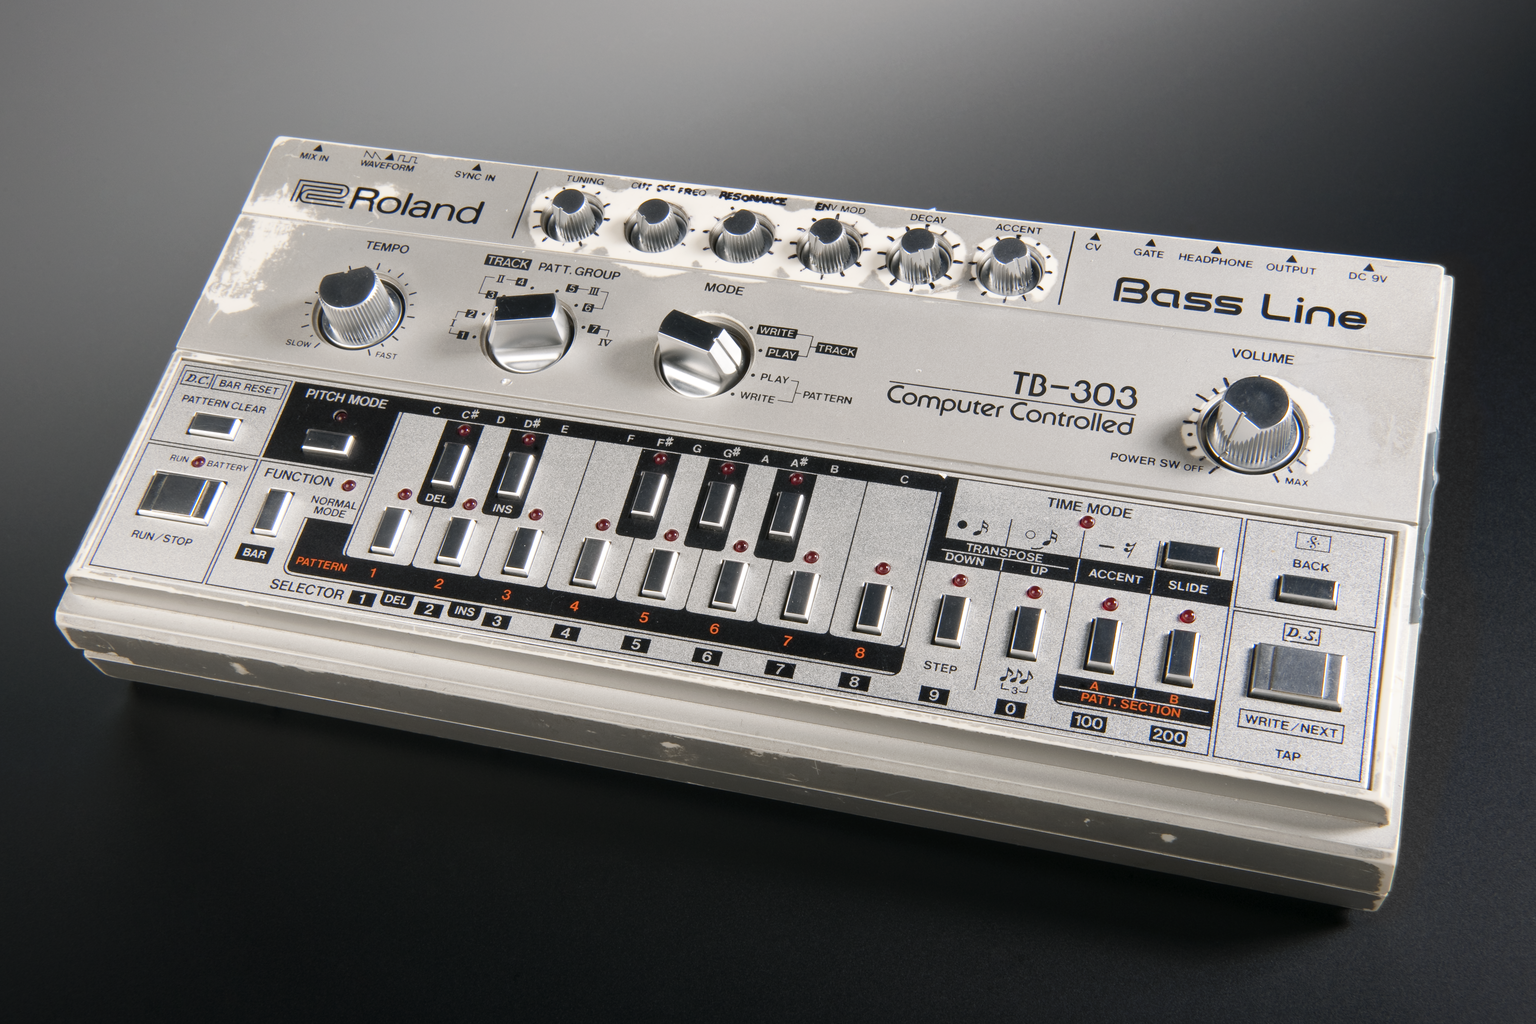 Roland TB-303 synthesizer on loan from the Museum of Techno (Credit: Science Museum)